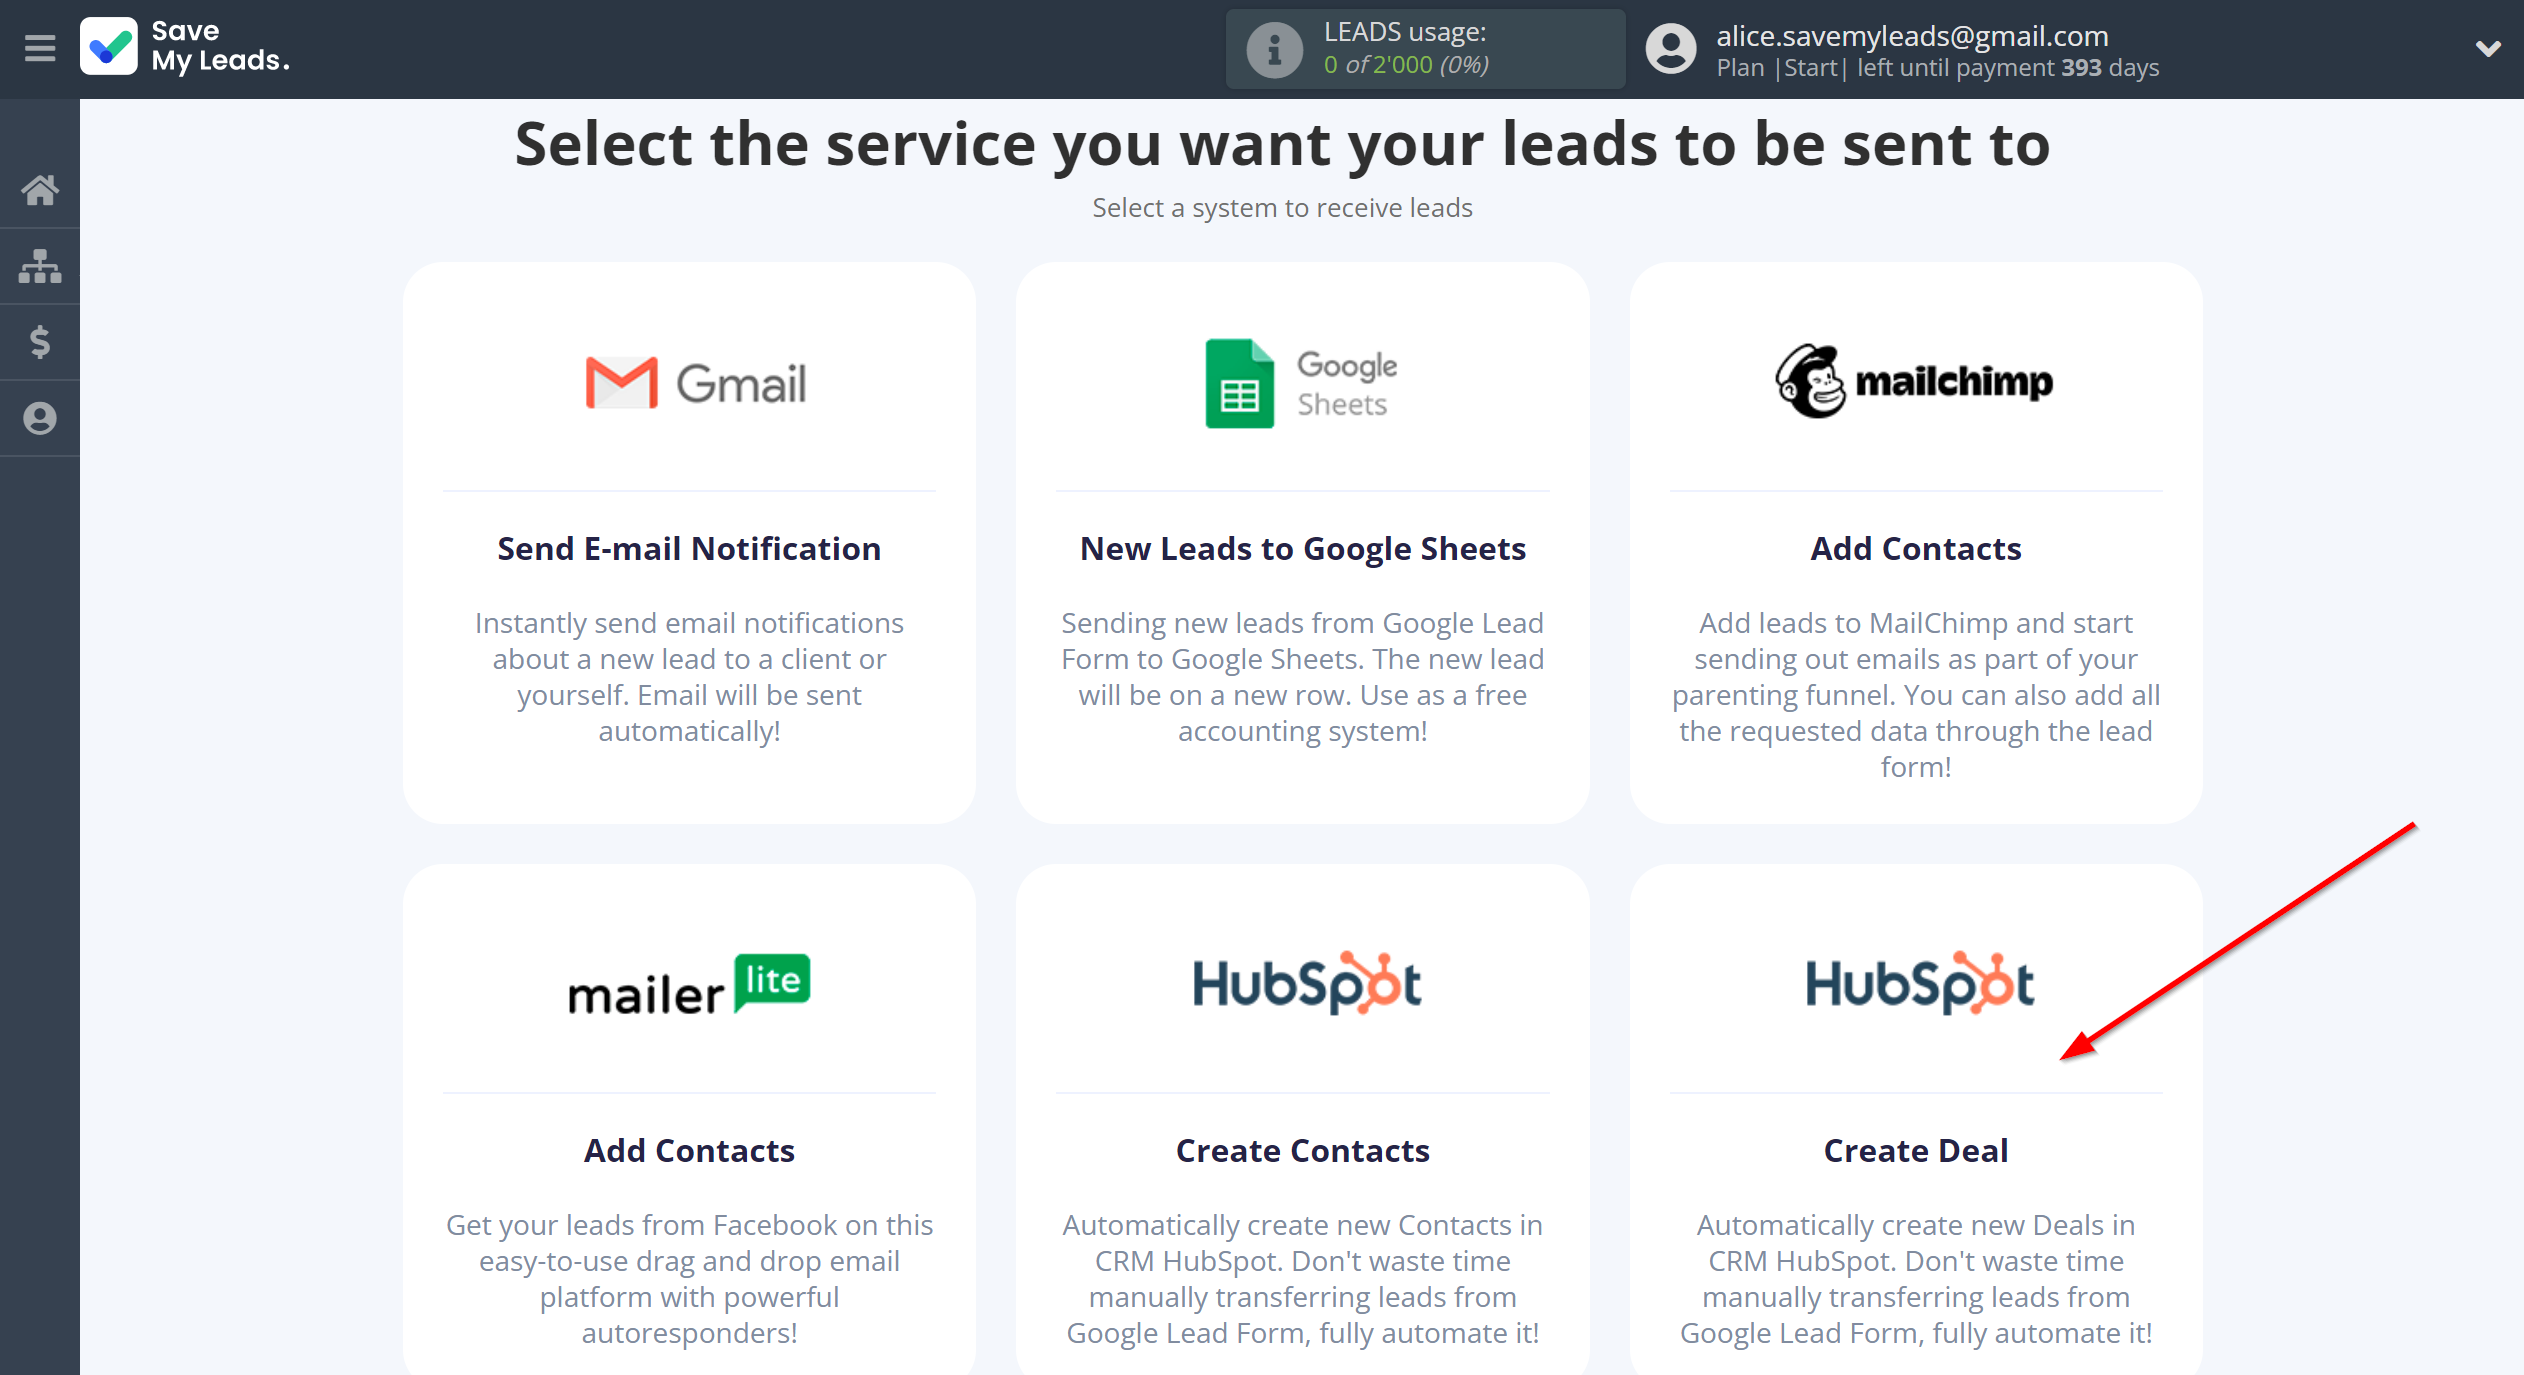 How to Connect Google Lead Form with HubSpot Create Deal | Data Destination system selection